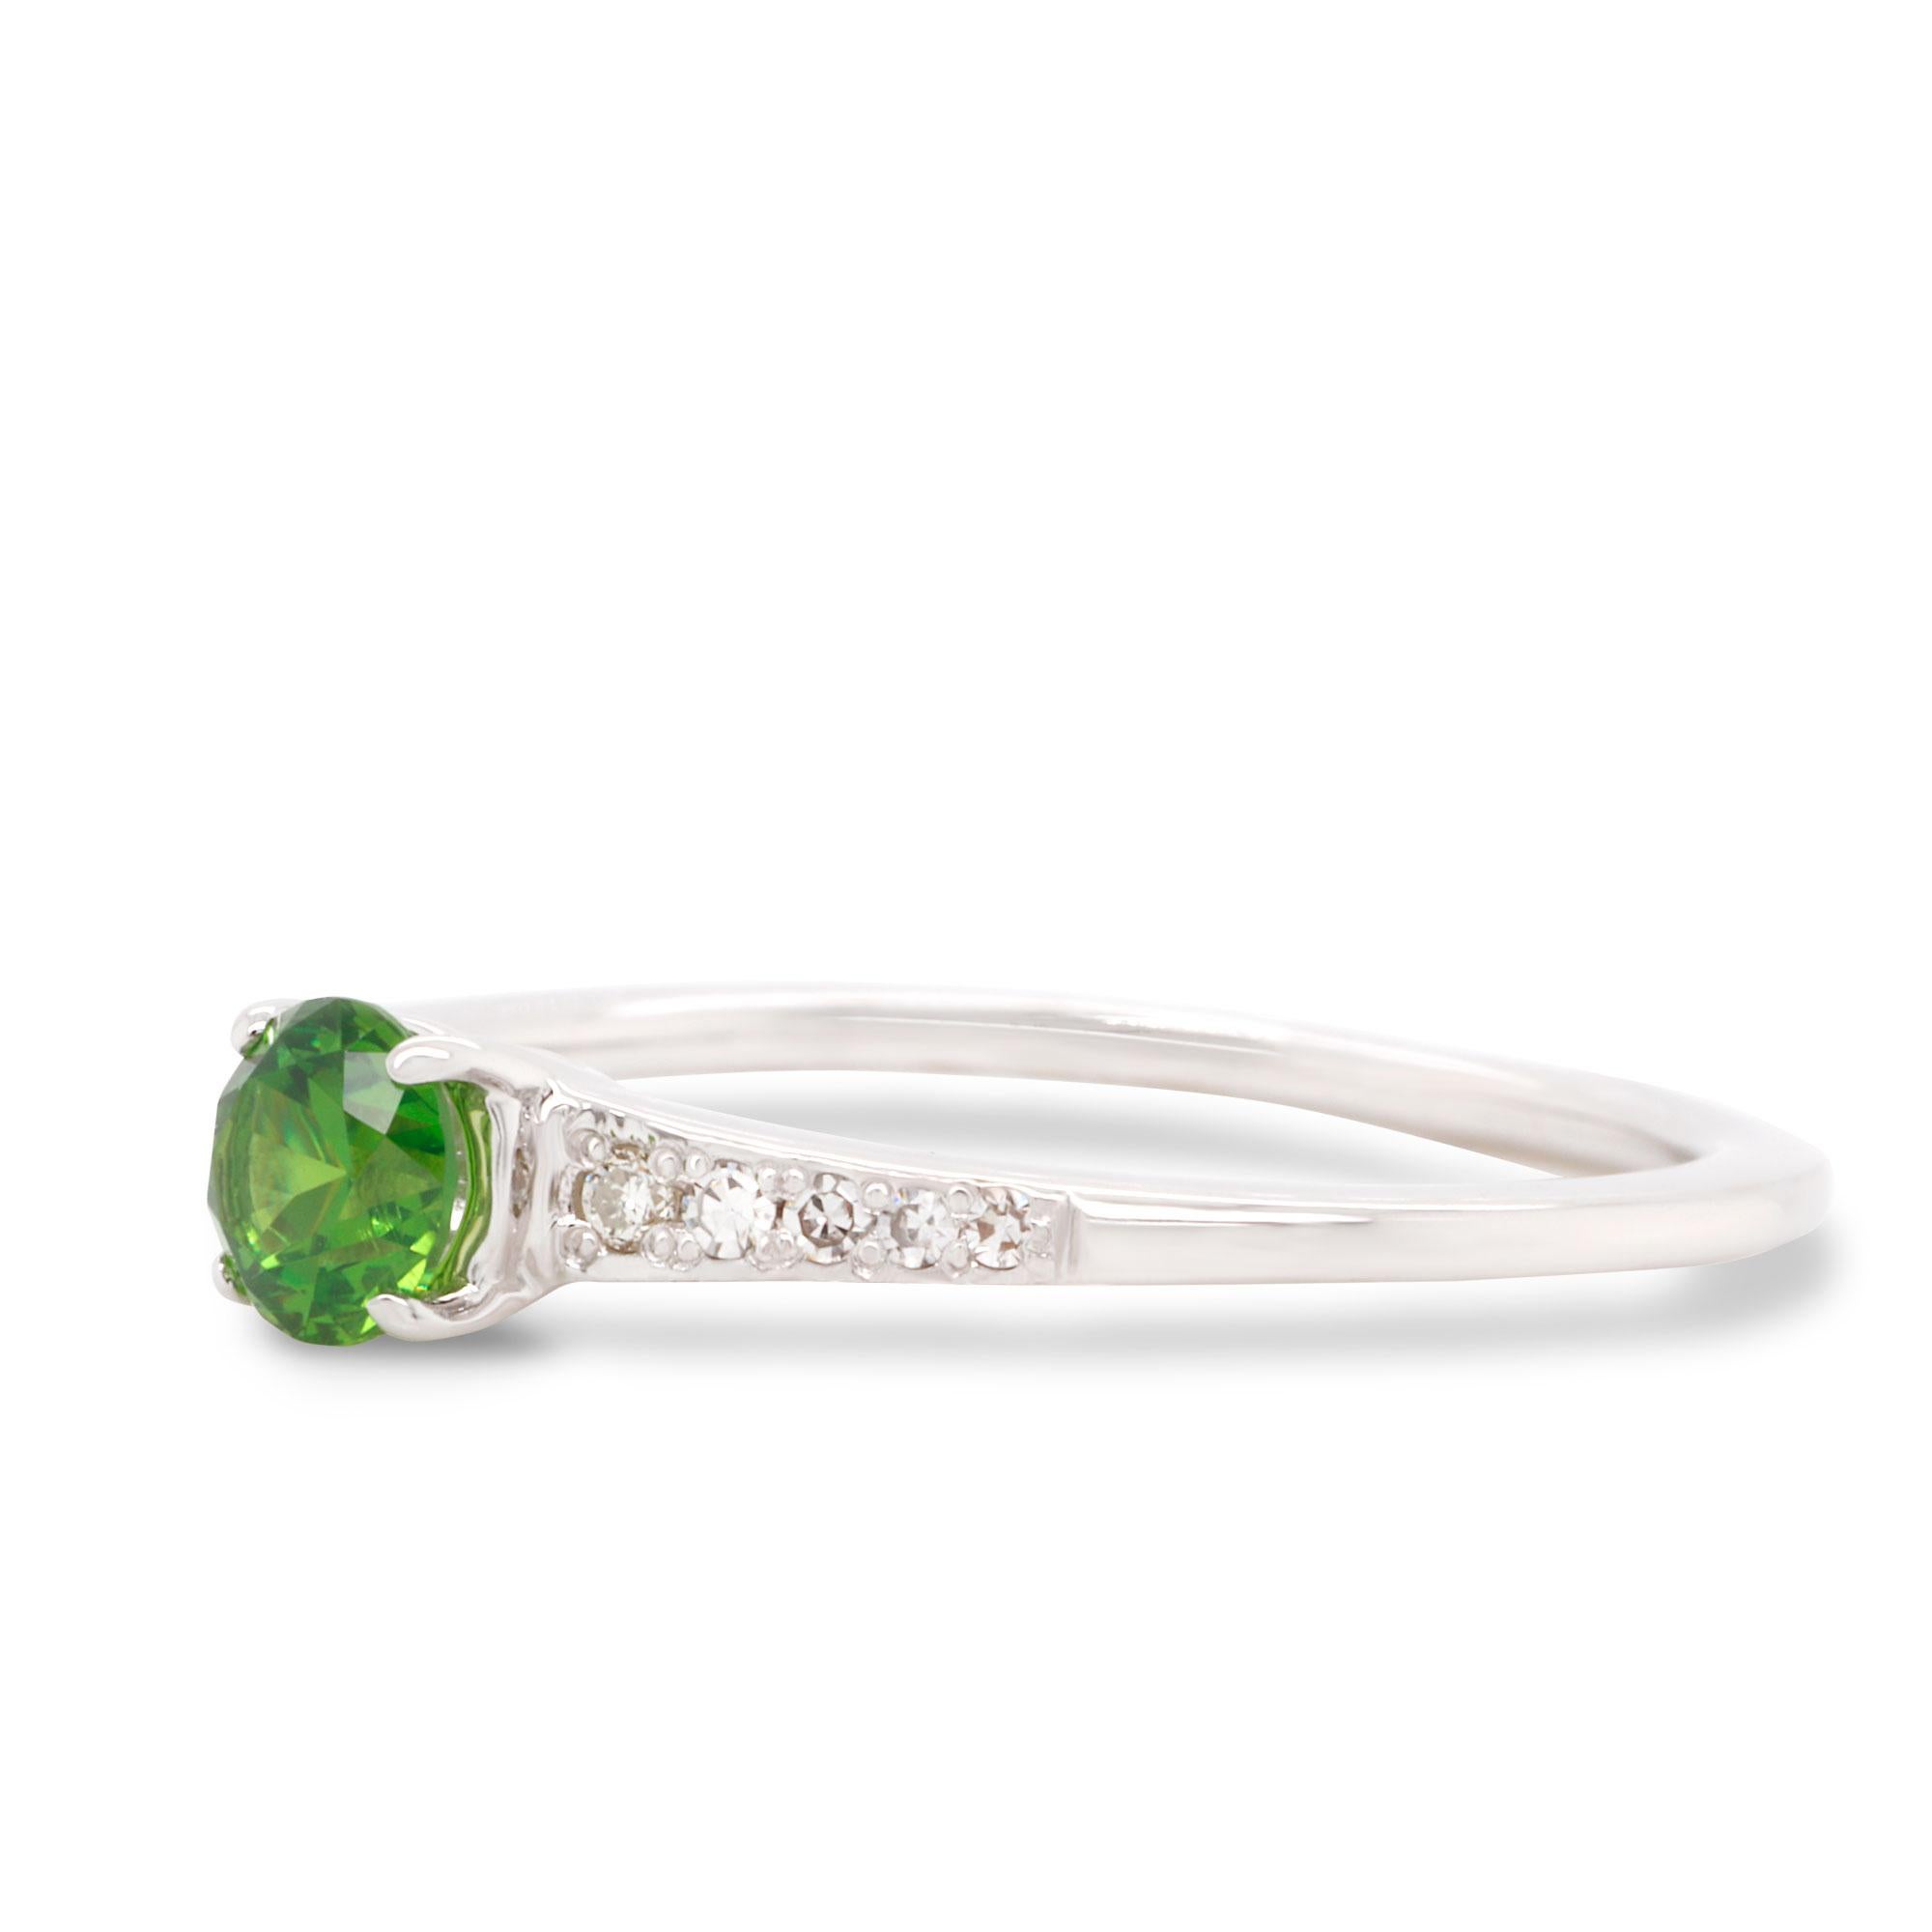 This is a classic 14K White Gold Ring with Diamonds. Center stone is a unique and rare Russian Demantoid 0.34 ct combined with white Diamonds totalling 0.052 ct. Perfect as for special occasion as for everyday wear, it can be used as wedding or